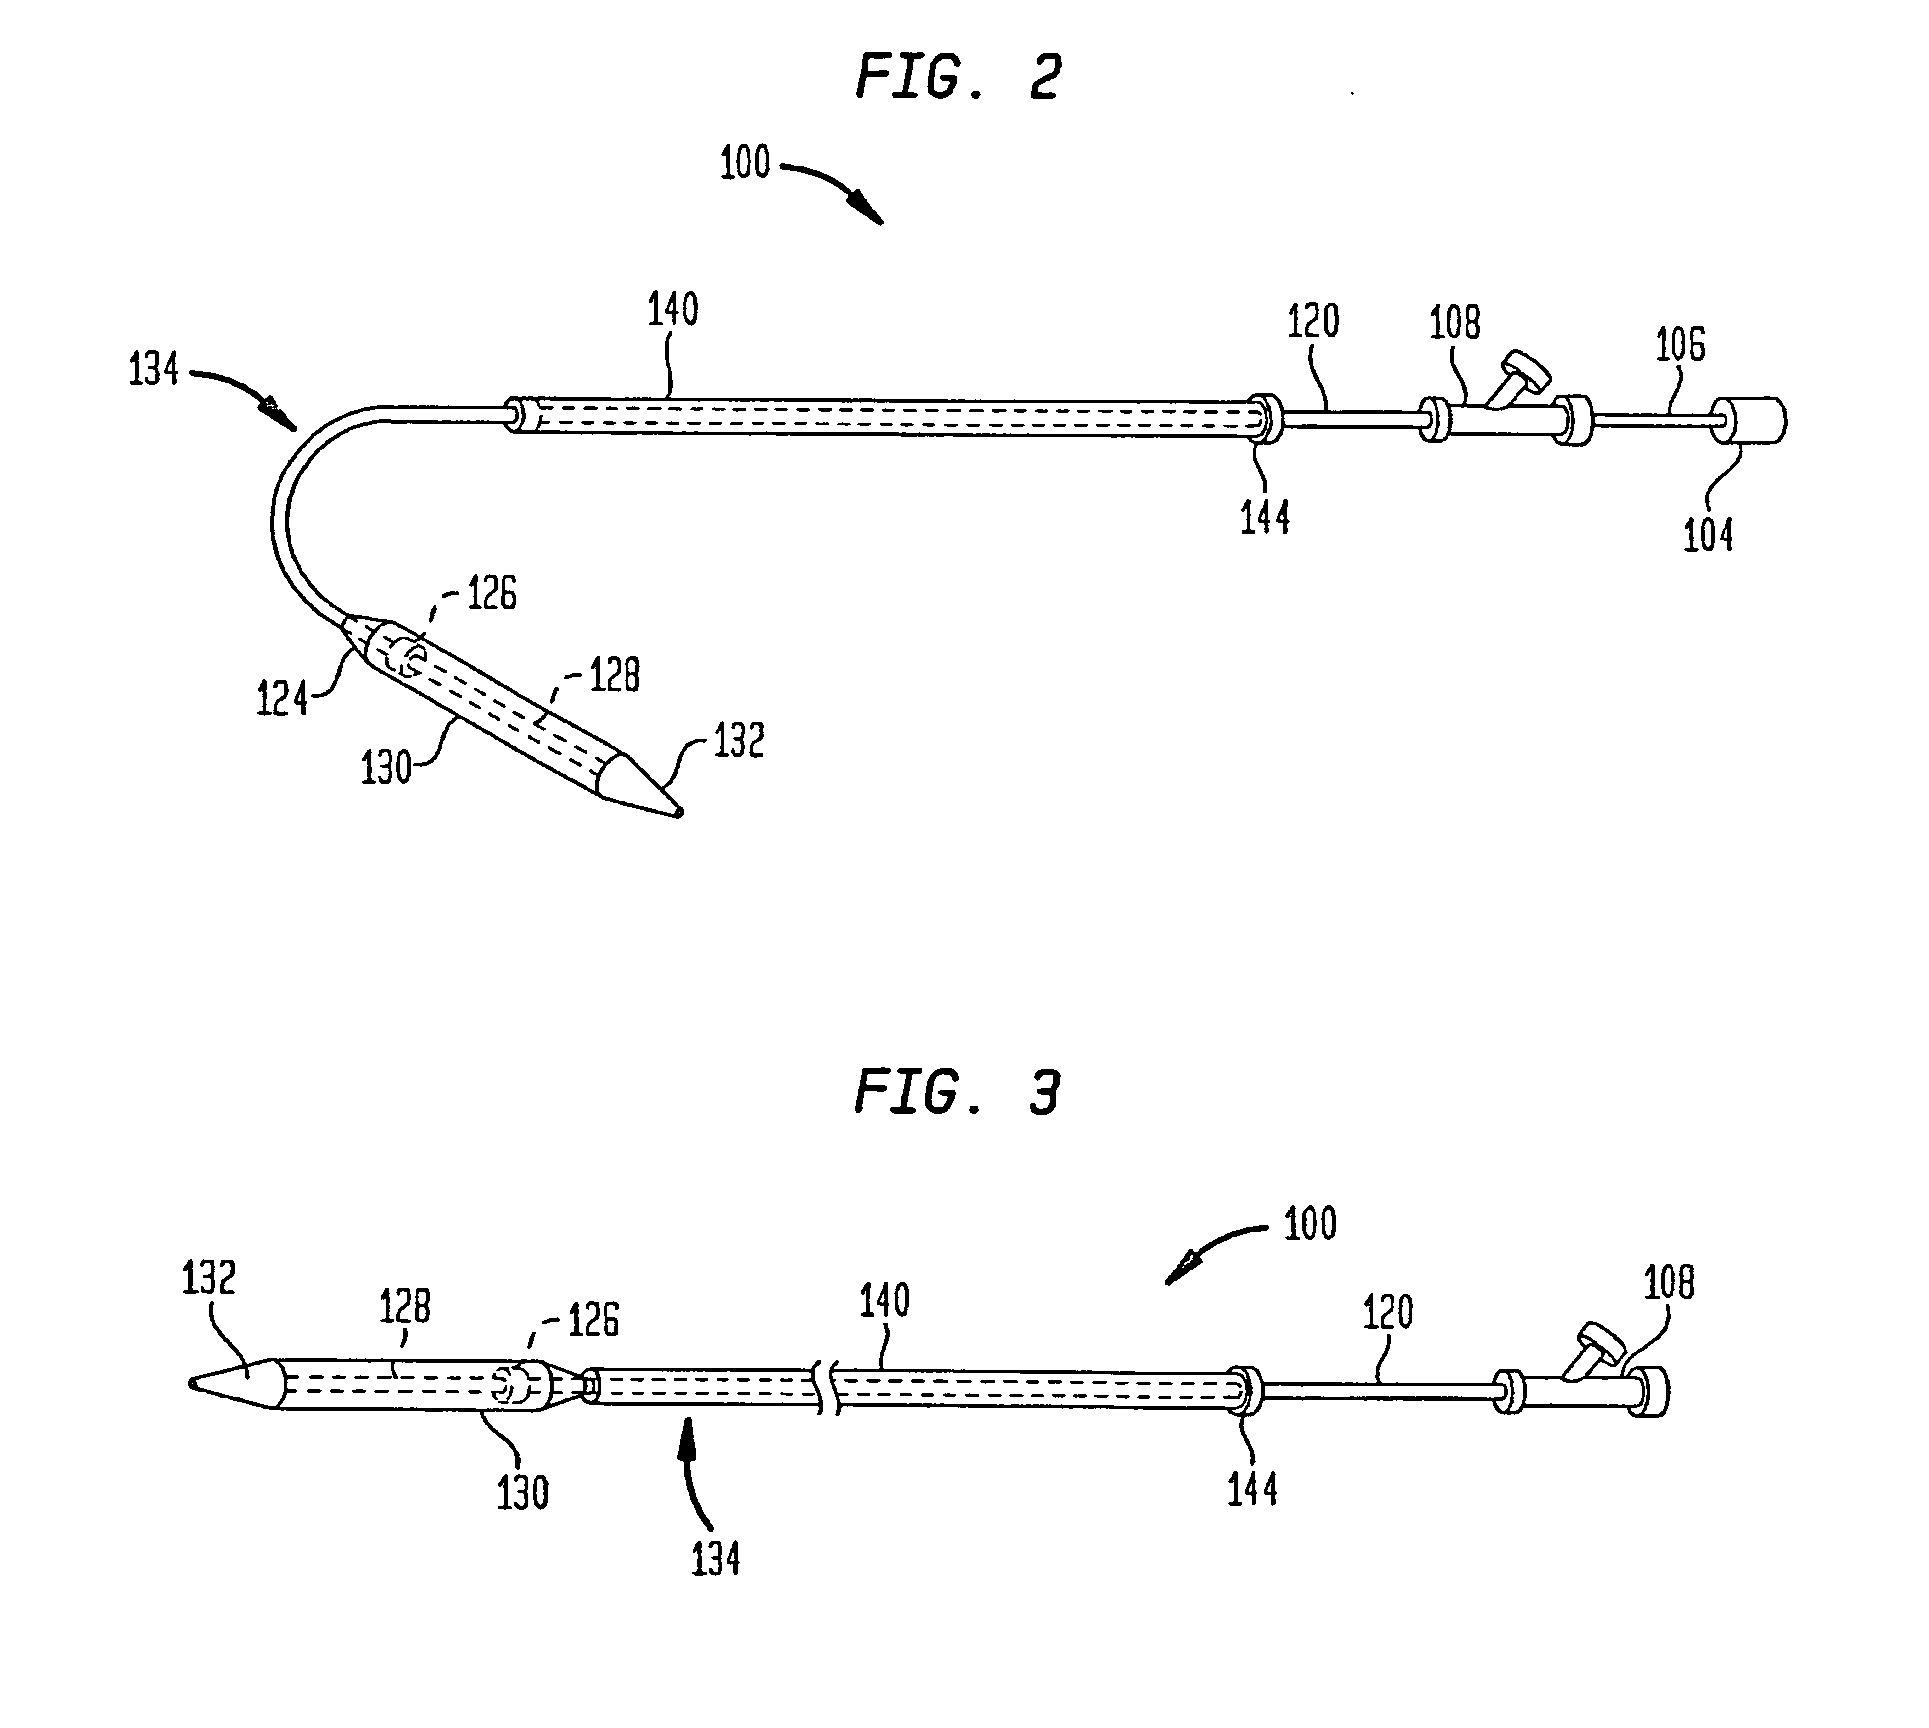 Delivery device having a curved shaft and a straightening member for transcatheter aortic valve implantation